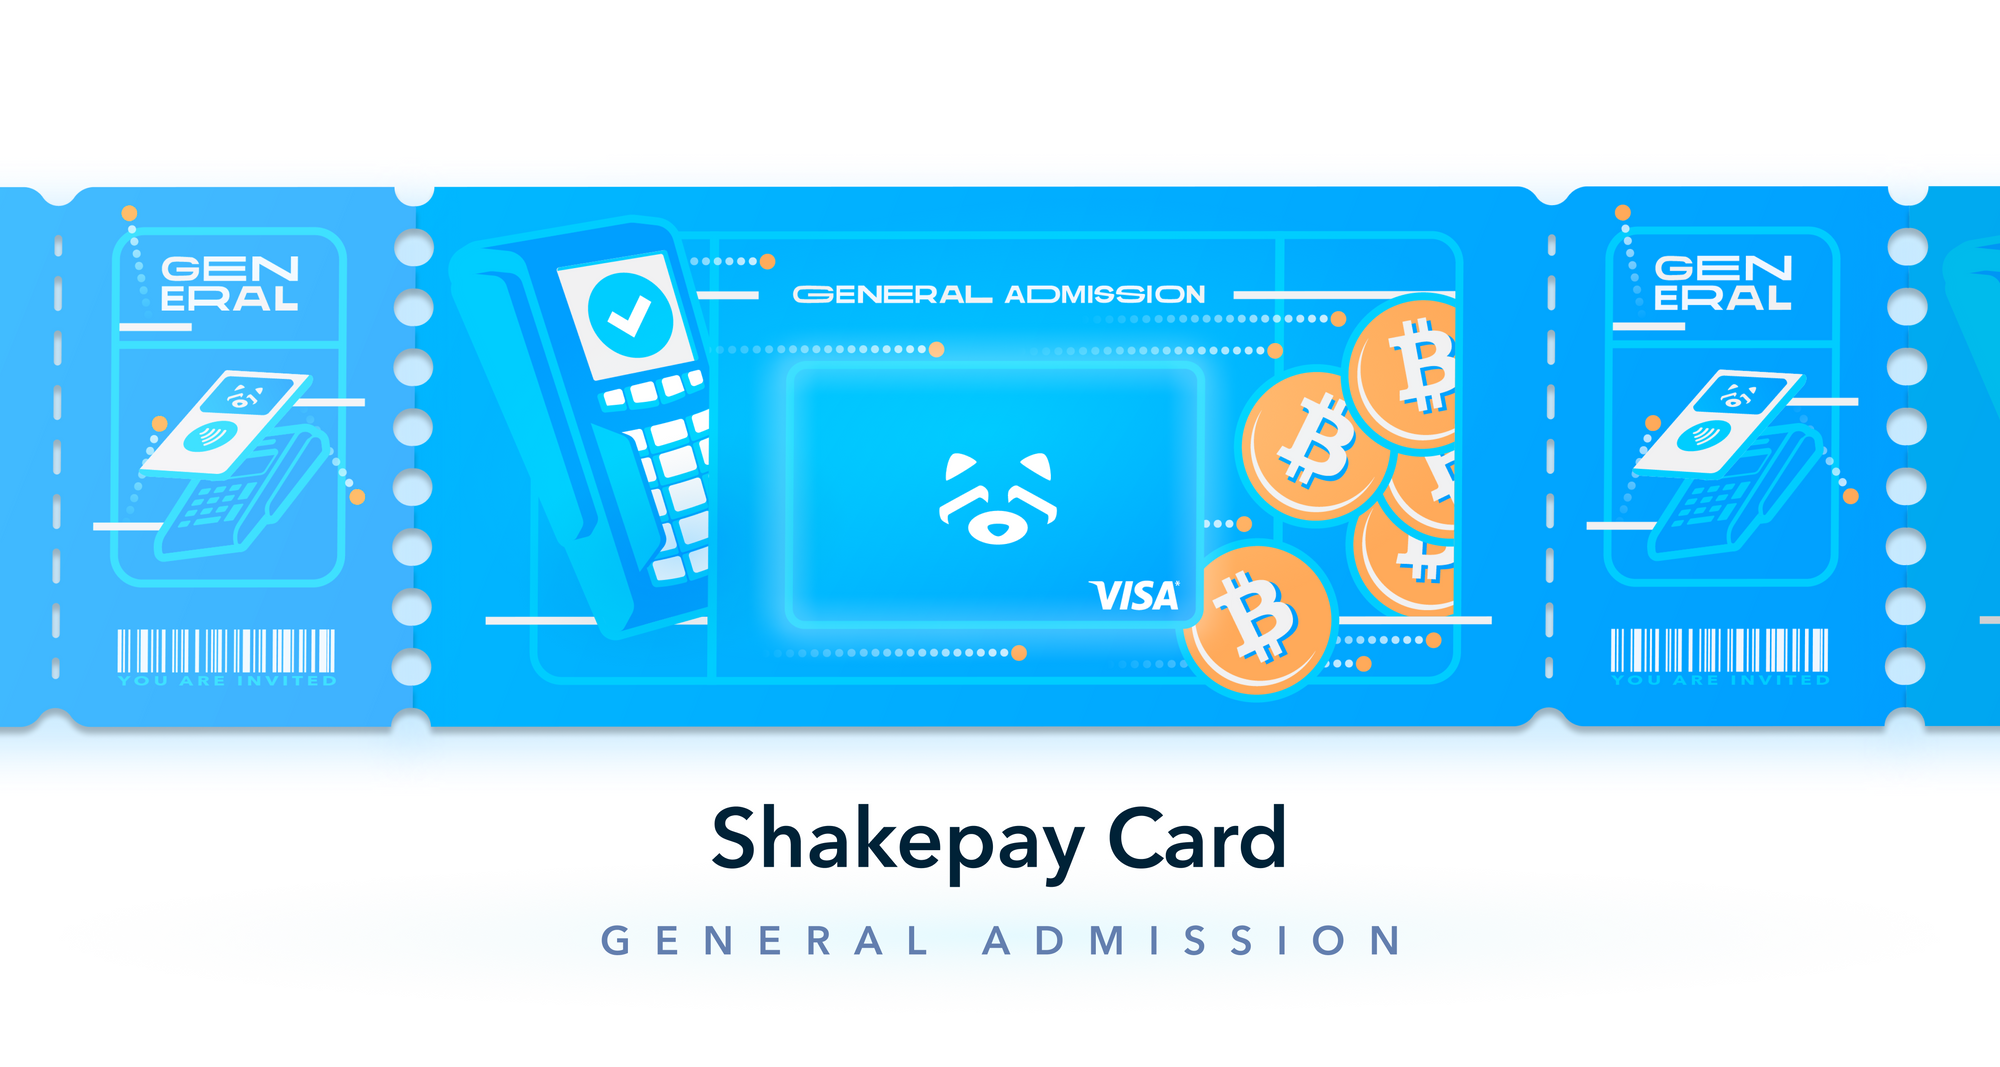 The wait is over! 💥 The Shakepay Card is here.